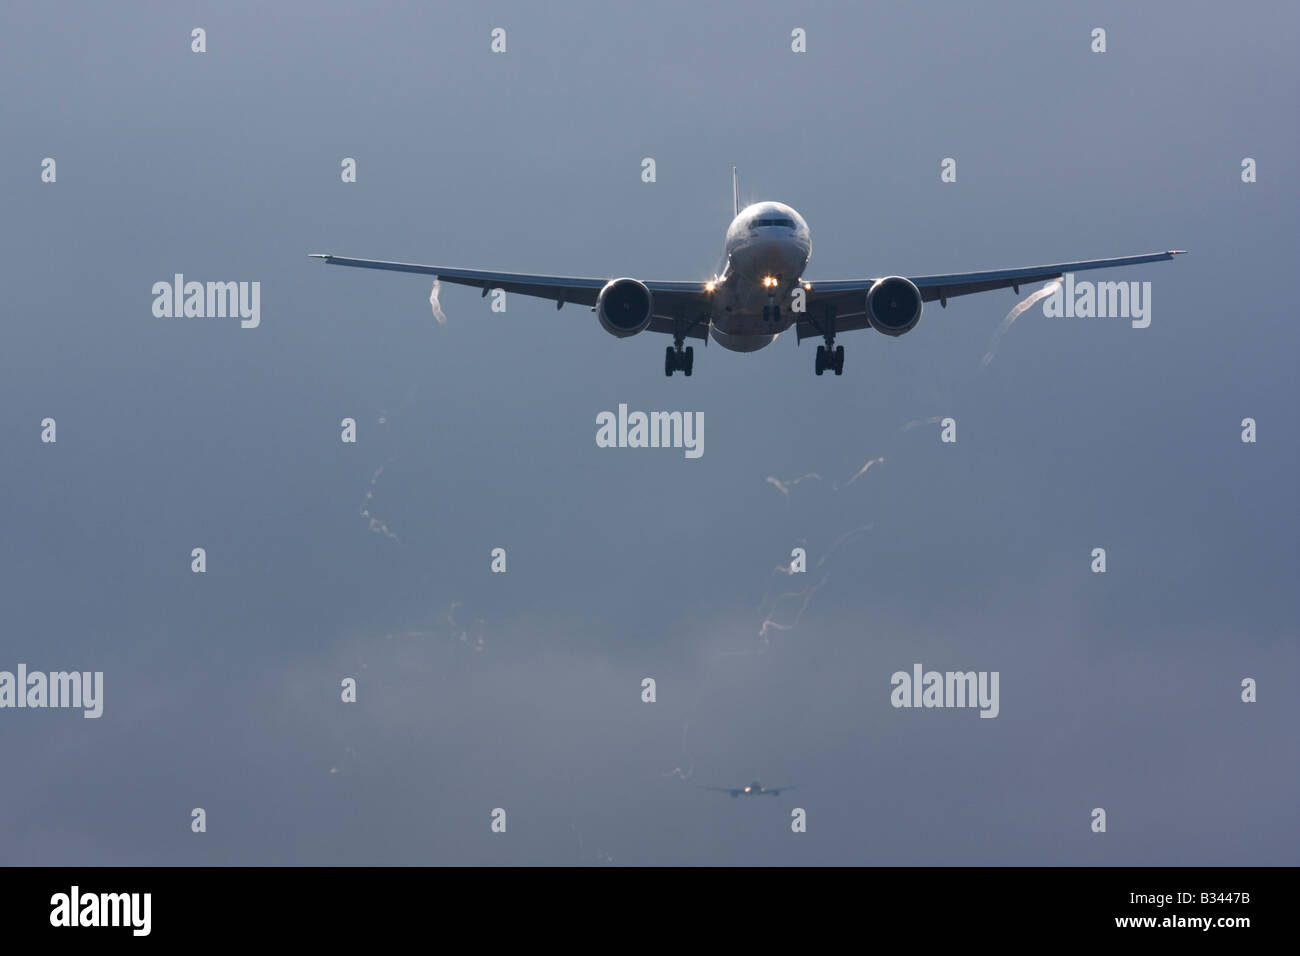 Commercial aeroplane on approach with visible wingtip vortices Stock Photo